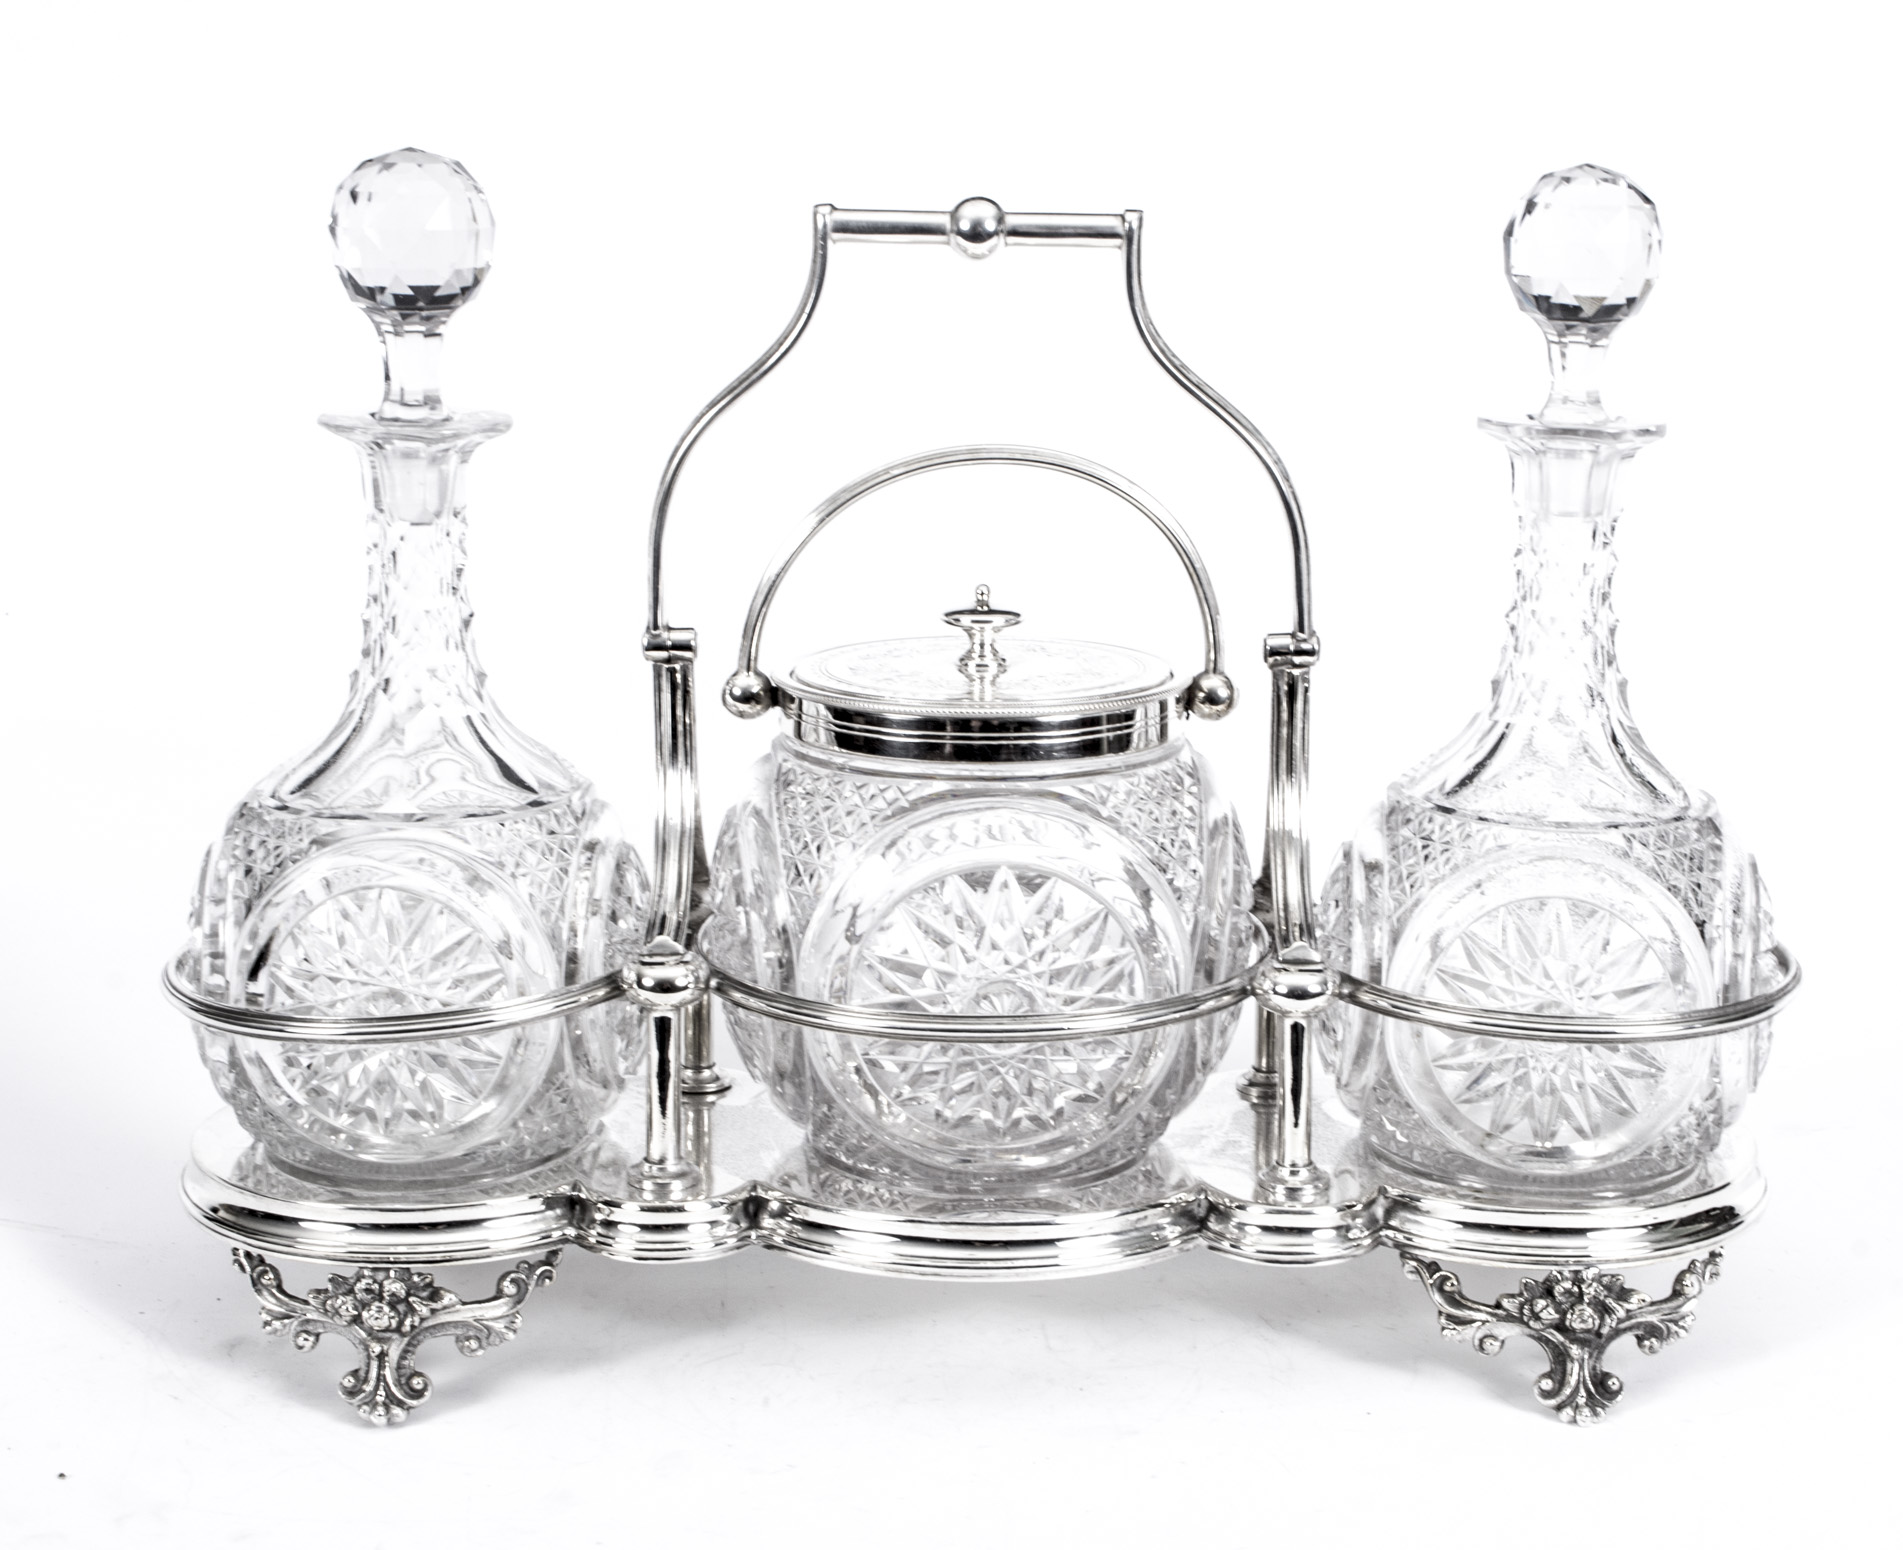 Regent Antiques - Silver & Silver Plate - Silver Plate - Antique Silver ...